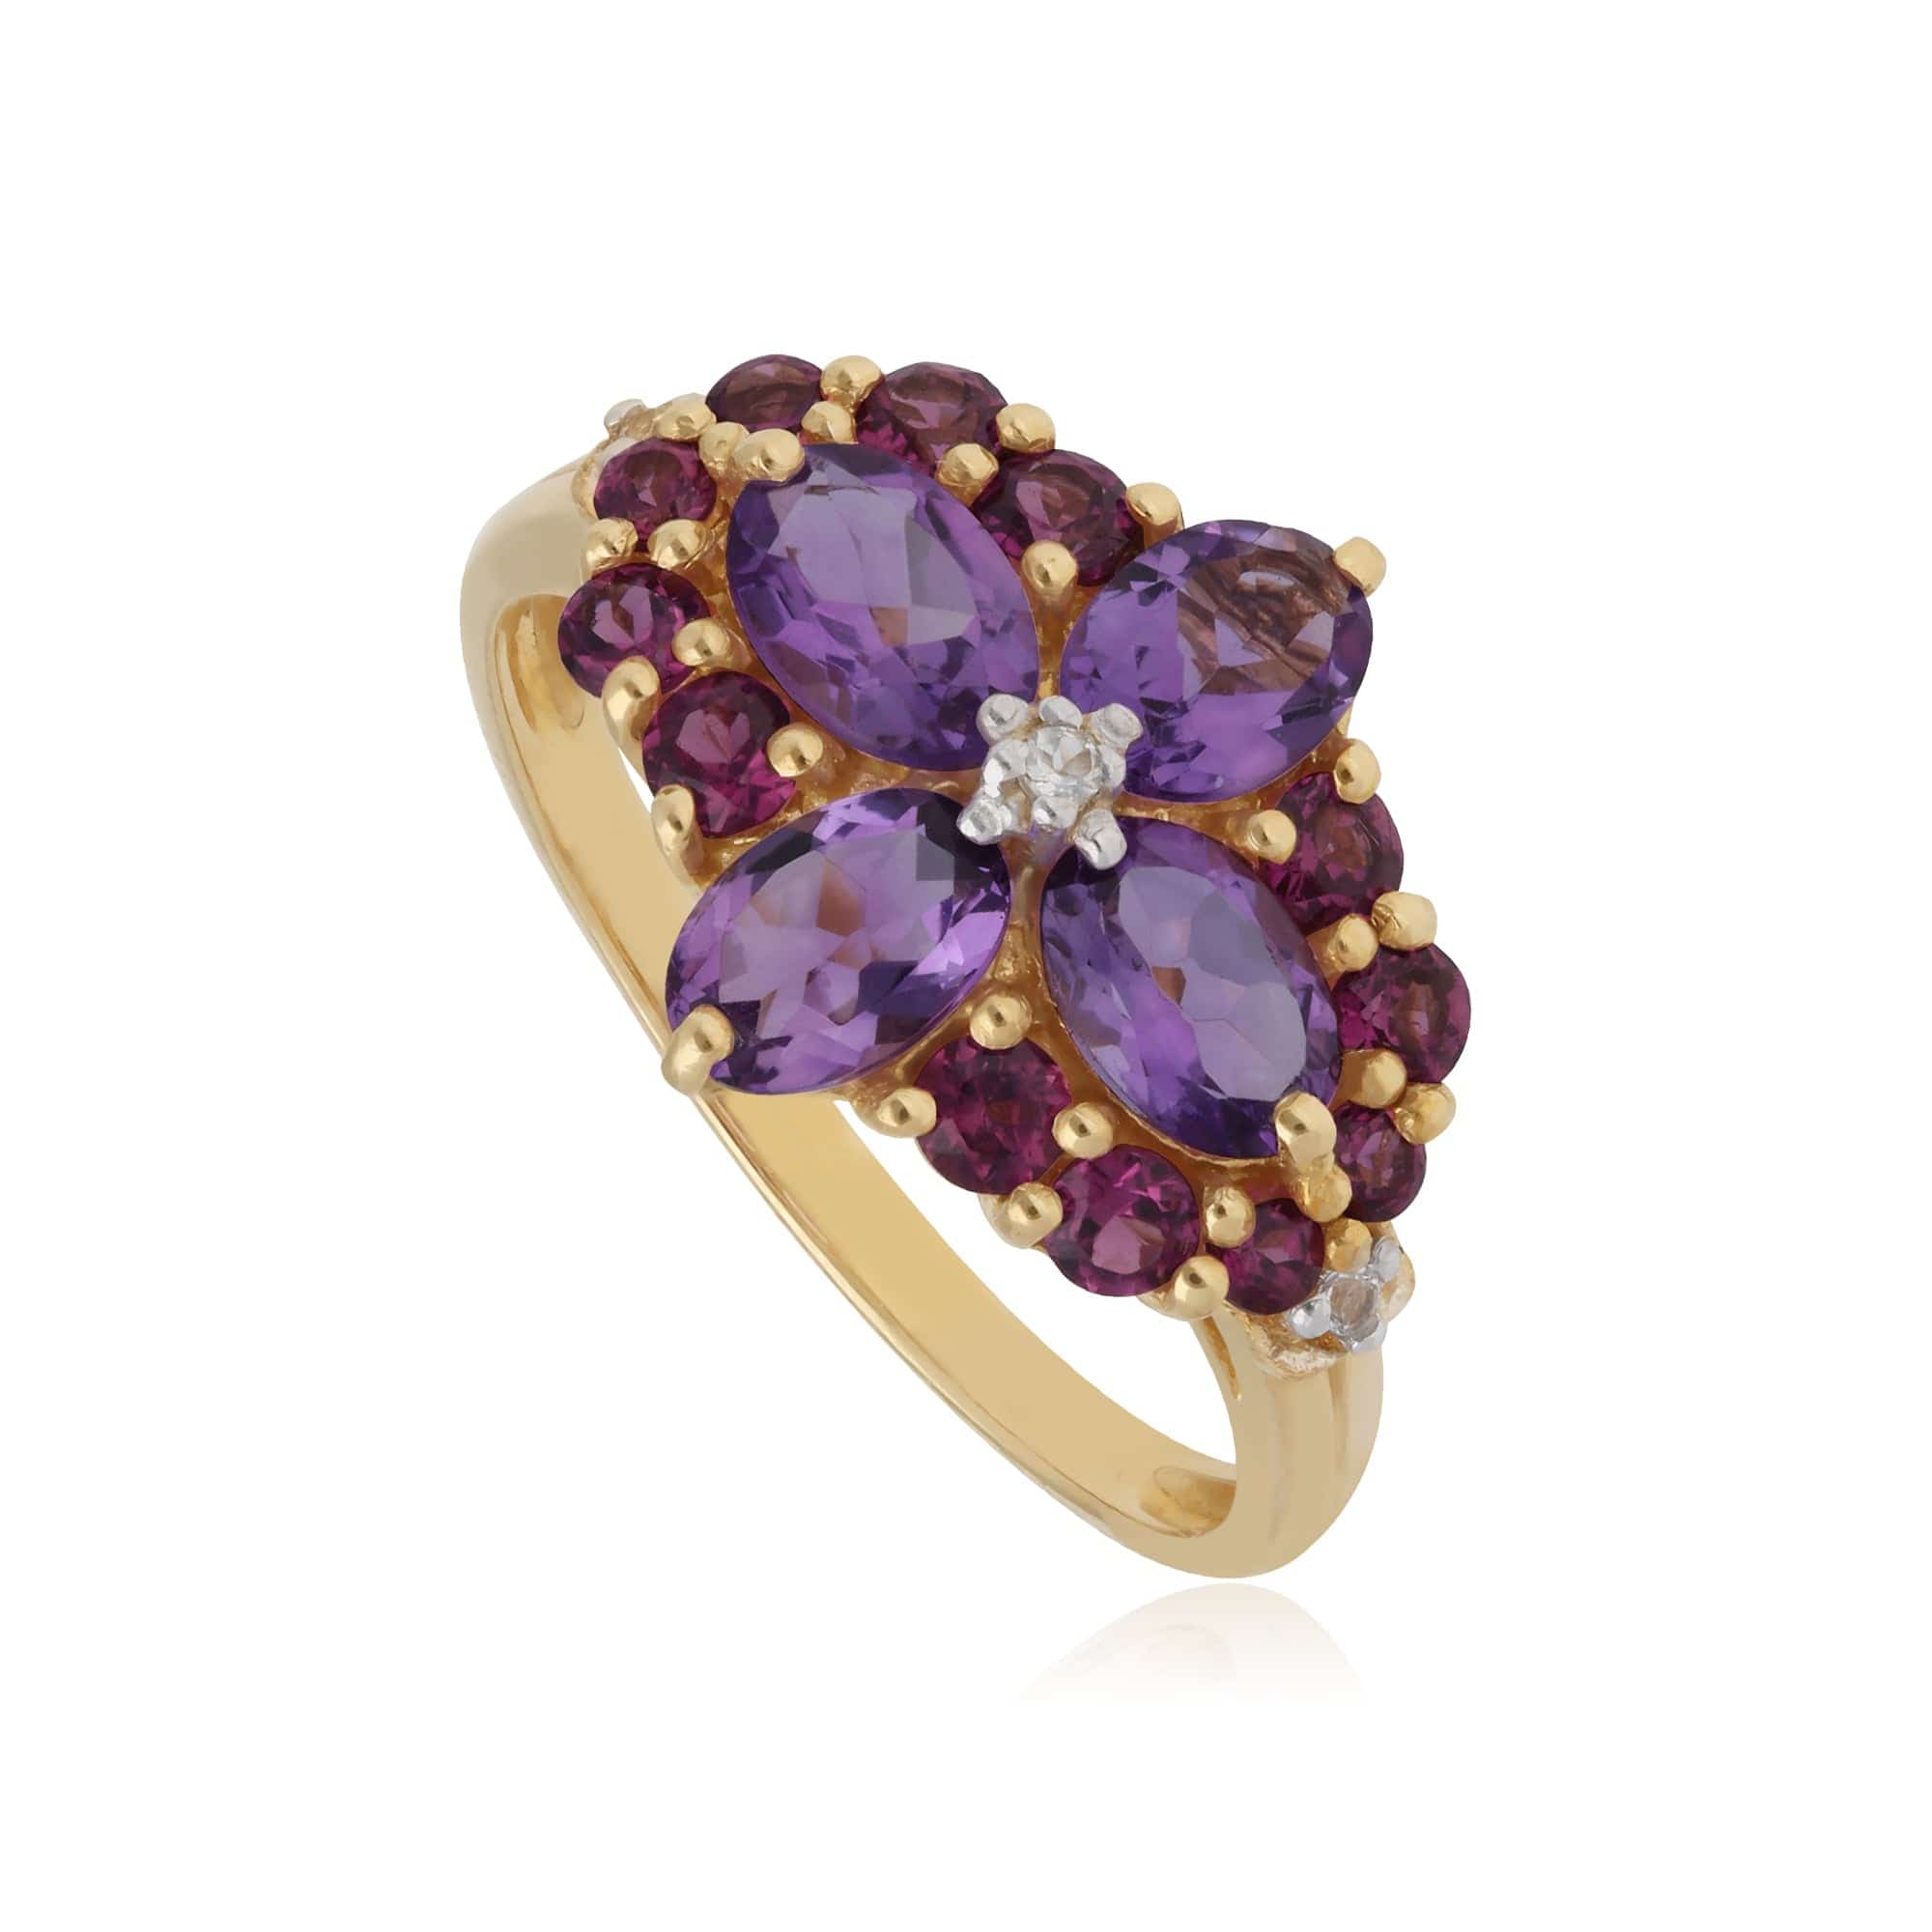 T0023R40R418 Rhodolite, White Topaz & Amethyst Floral Cocktail Ring in 9ct Yellow Gold 1